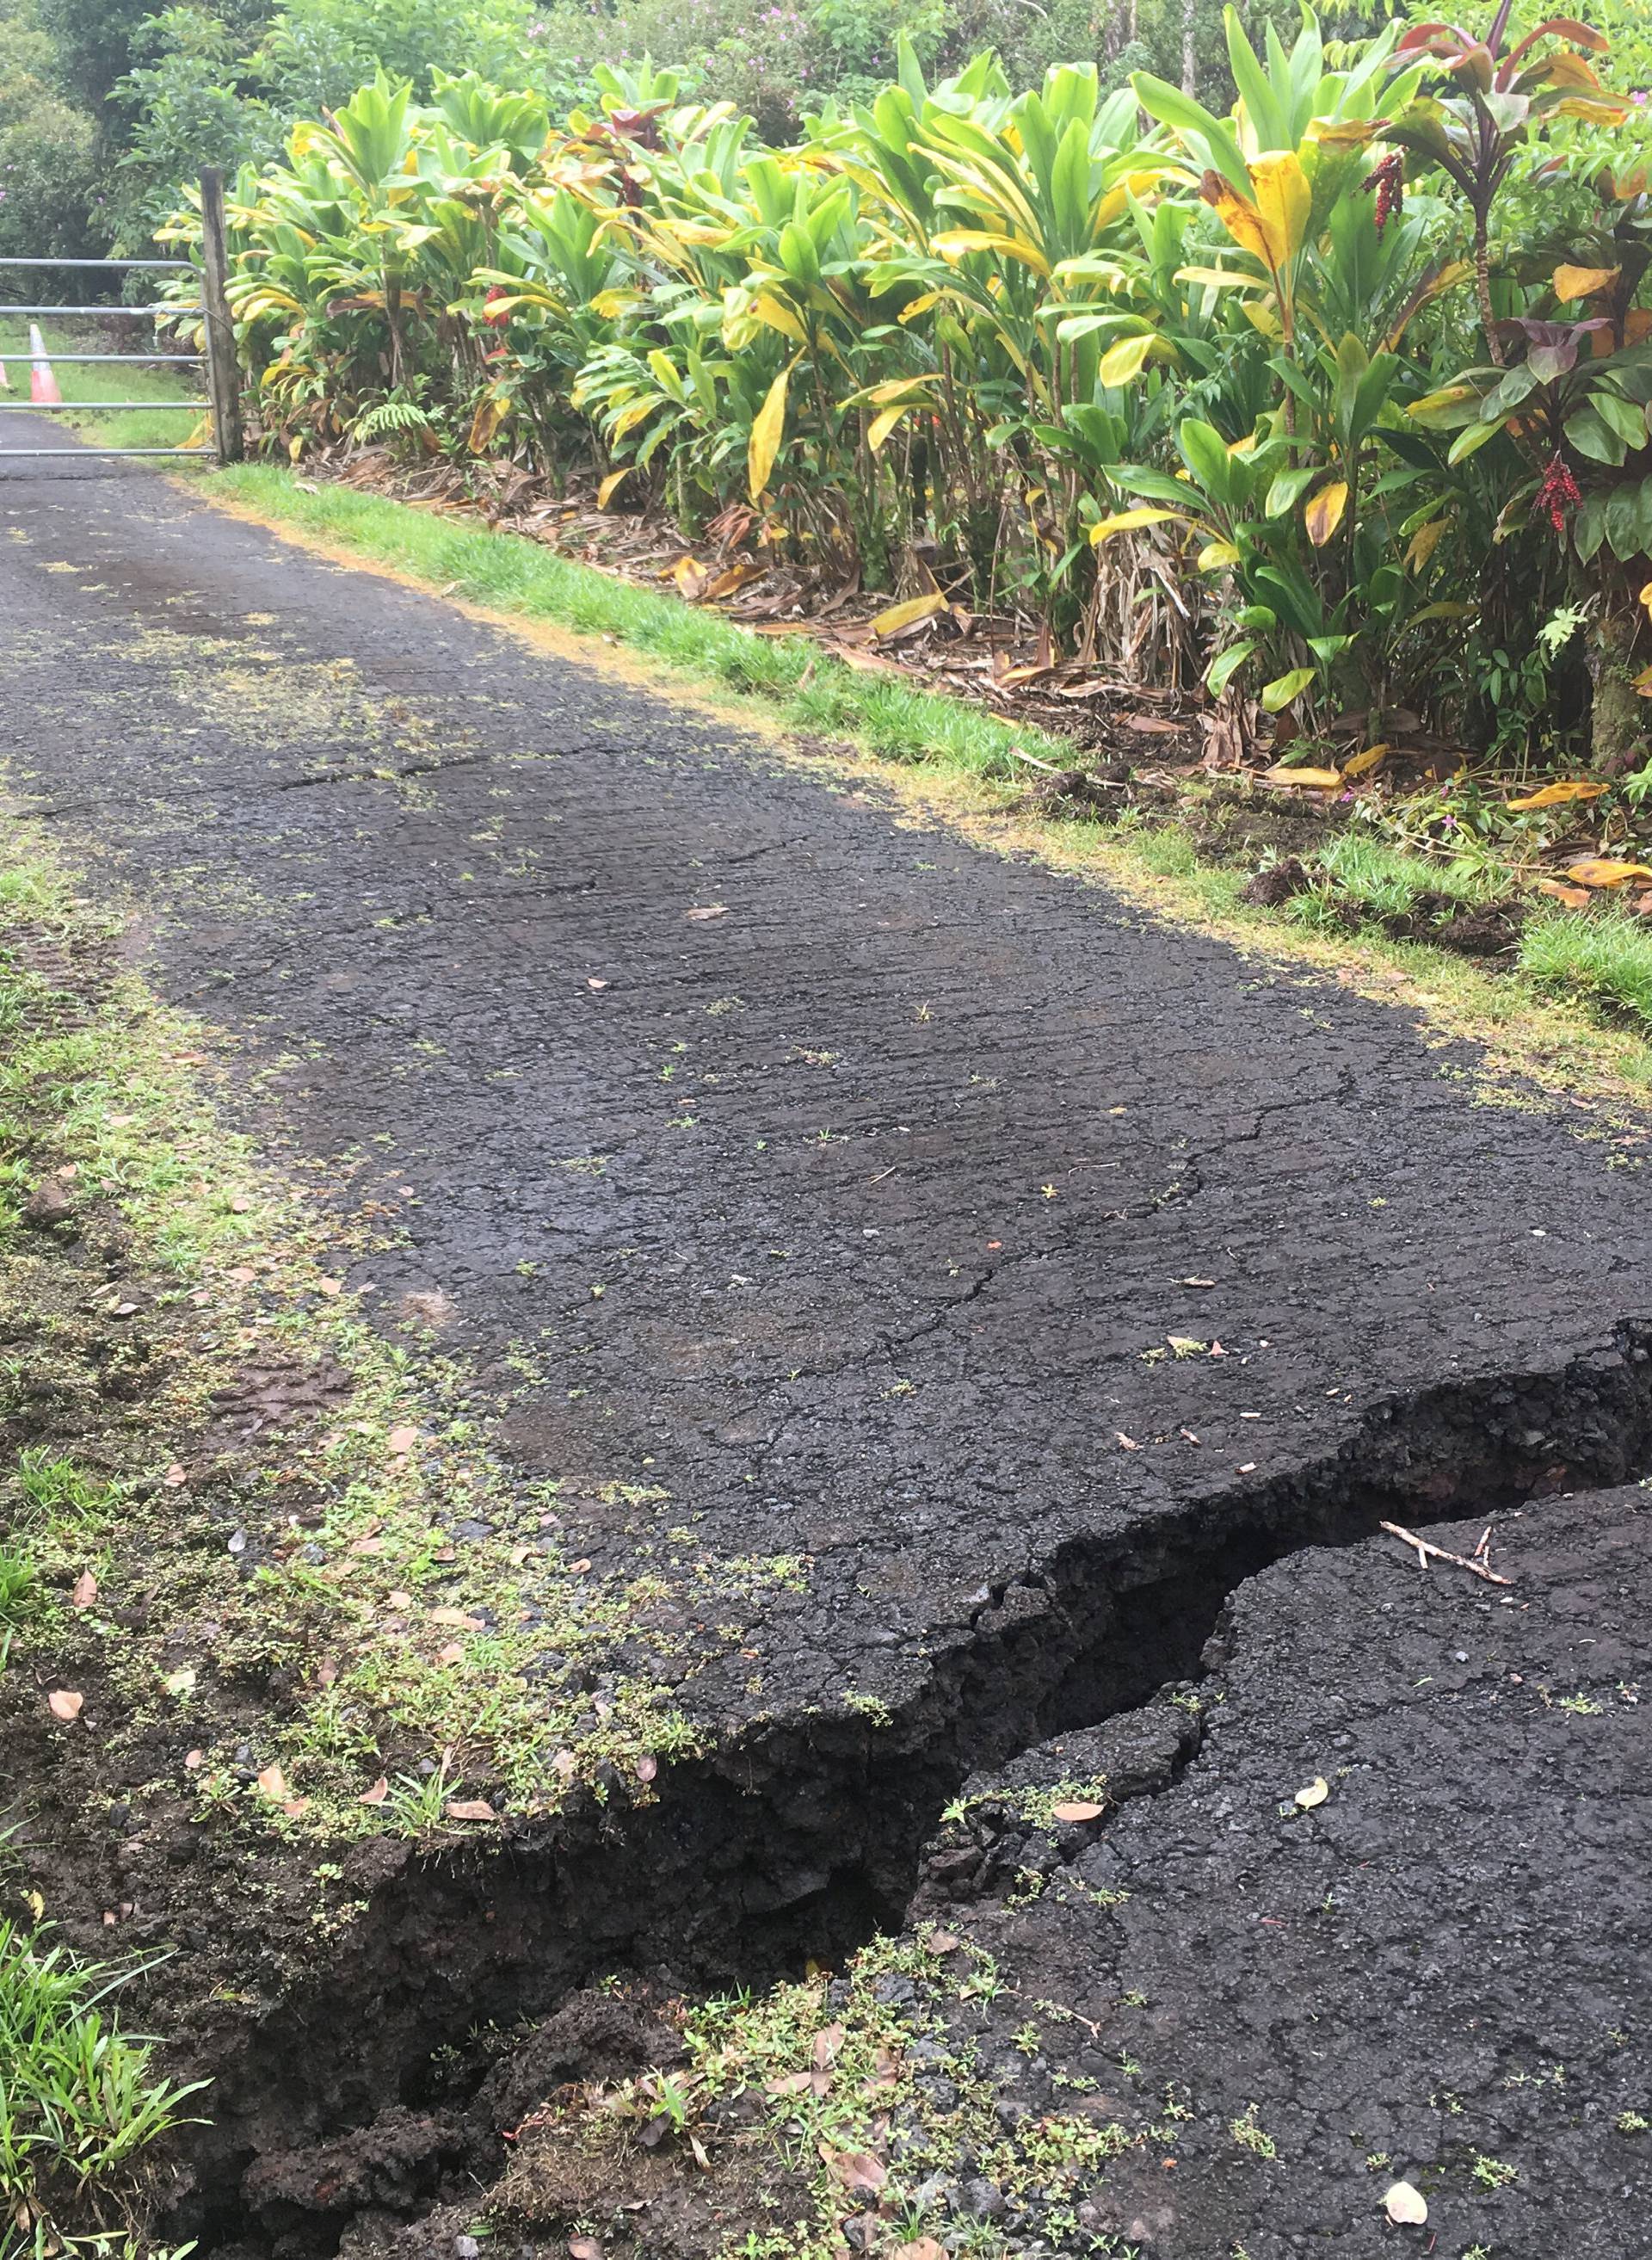 A geologist inspects a crack on Old Kalapana Road in Hawaii